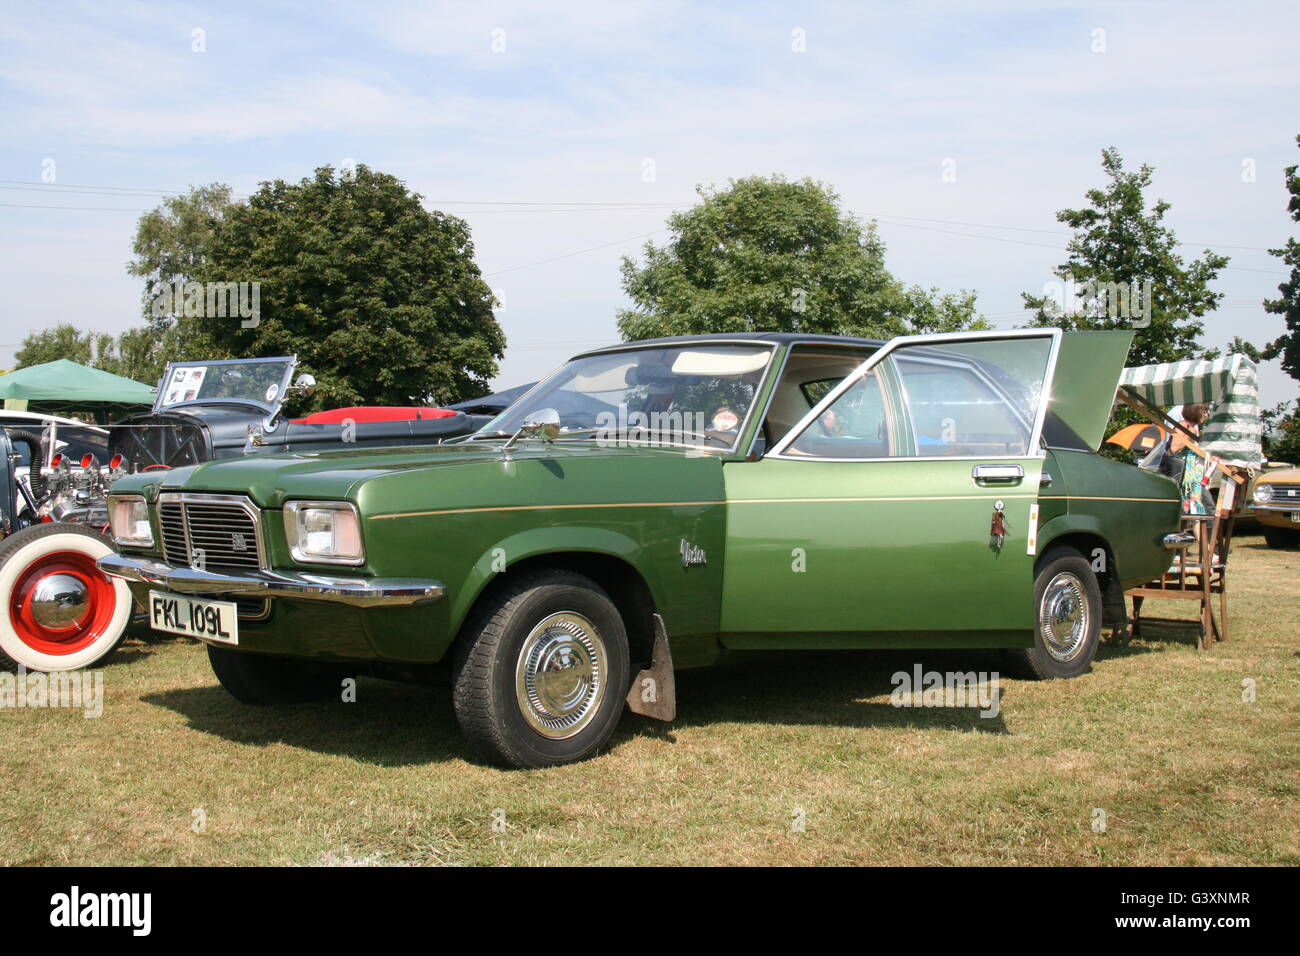 A GREEN VAUXHALL VICTOR 1970'S CLASSIC MOTOR CAR AT A CLASSIC CAR SHOW Stock Photo